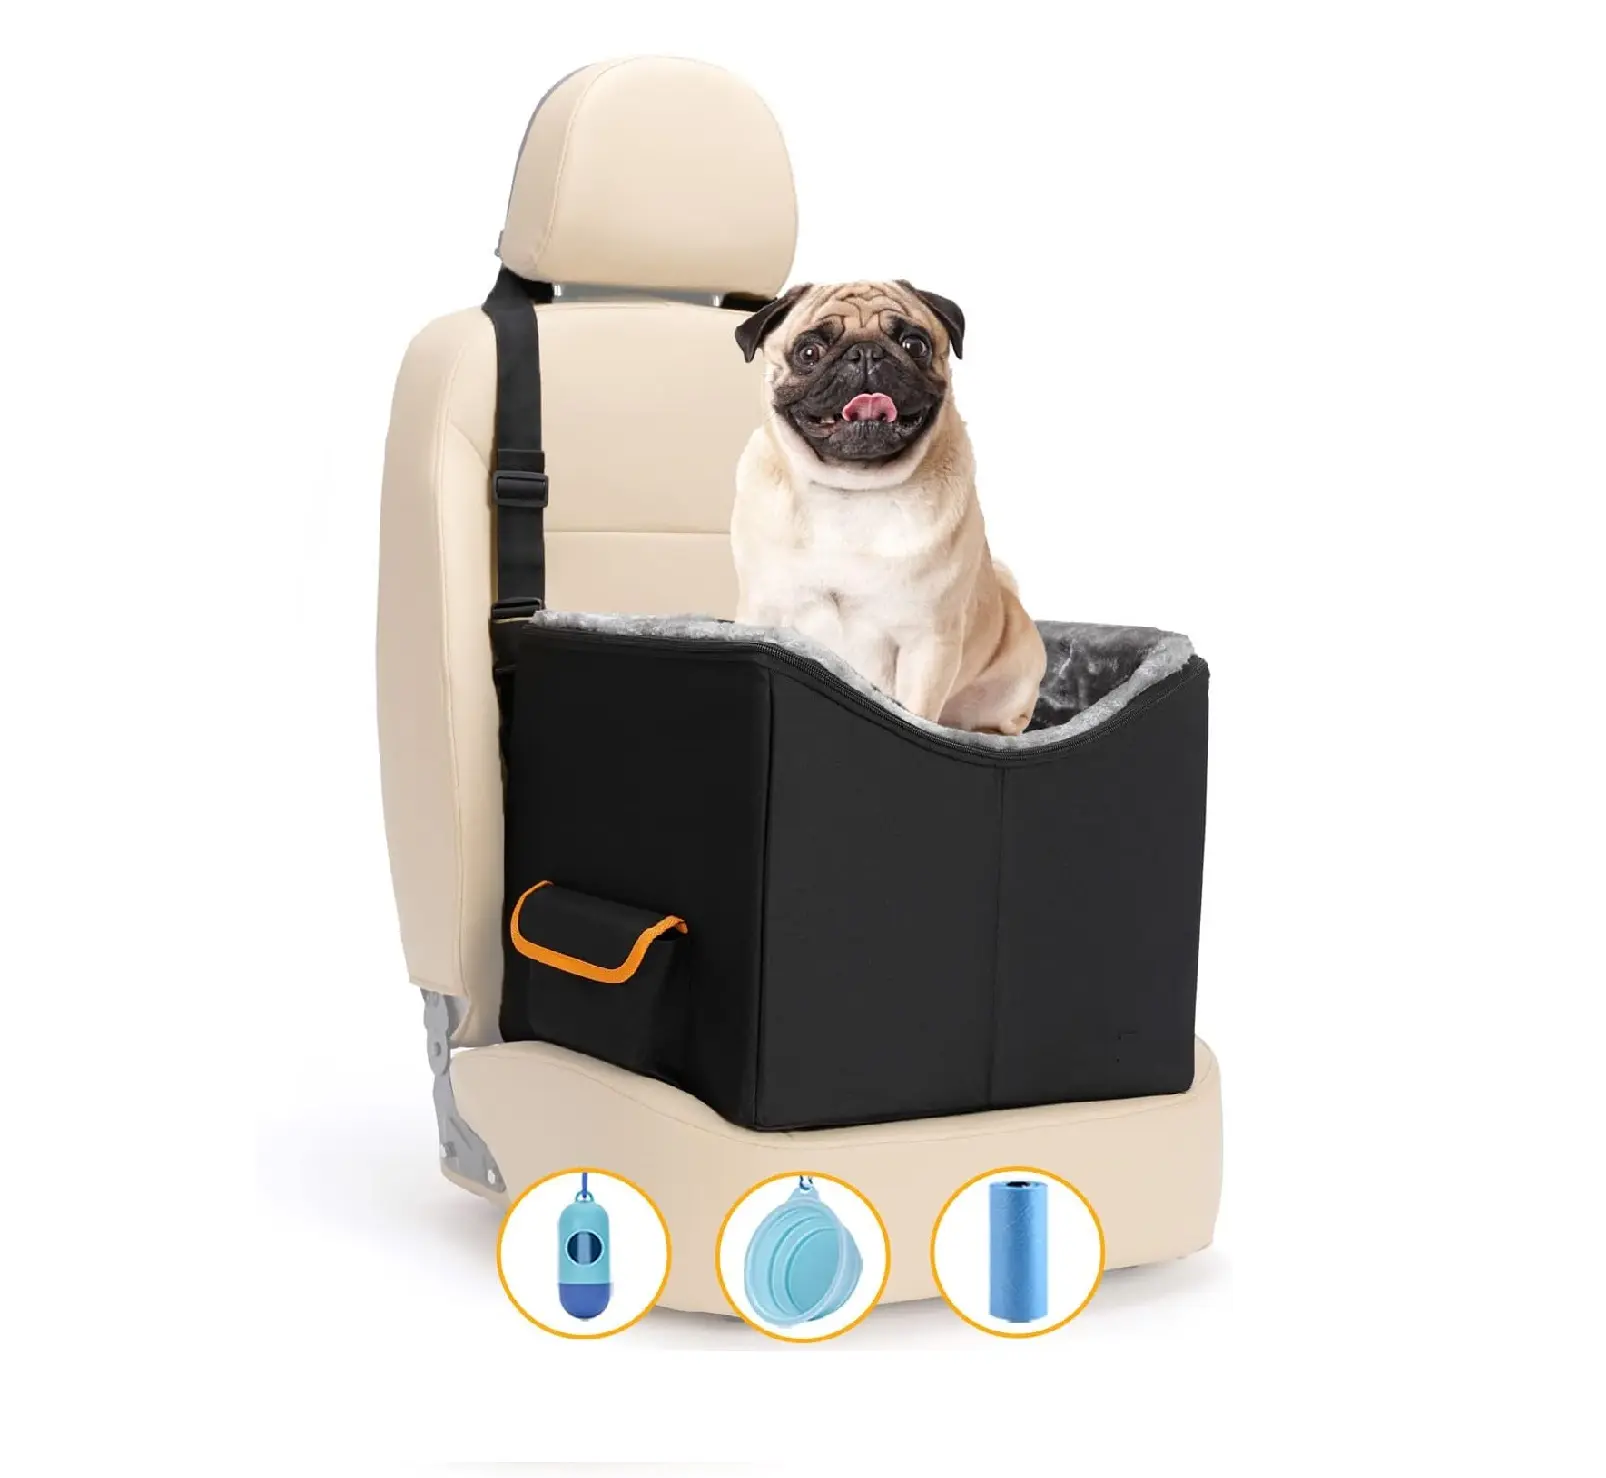 Elevated Dog Booster Seat Pet Travel Carrier Pet Car Booster Seat for Small Dogs Cats Bed for Car with Adjustable Straps